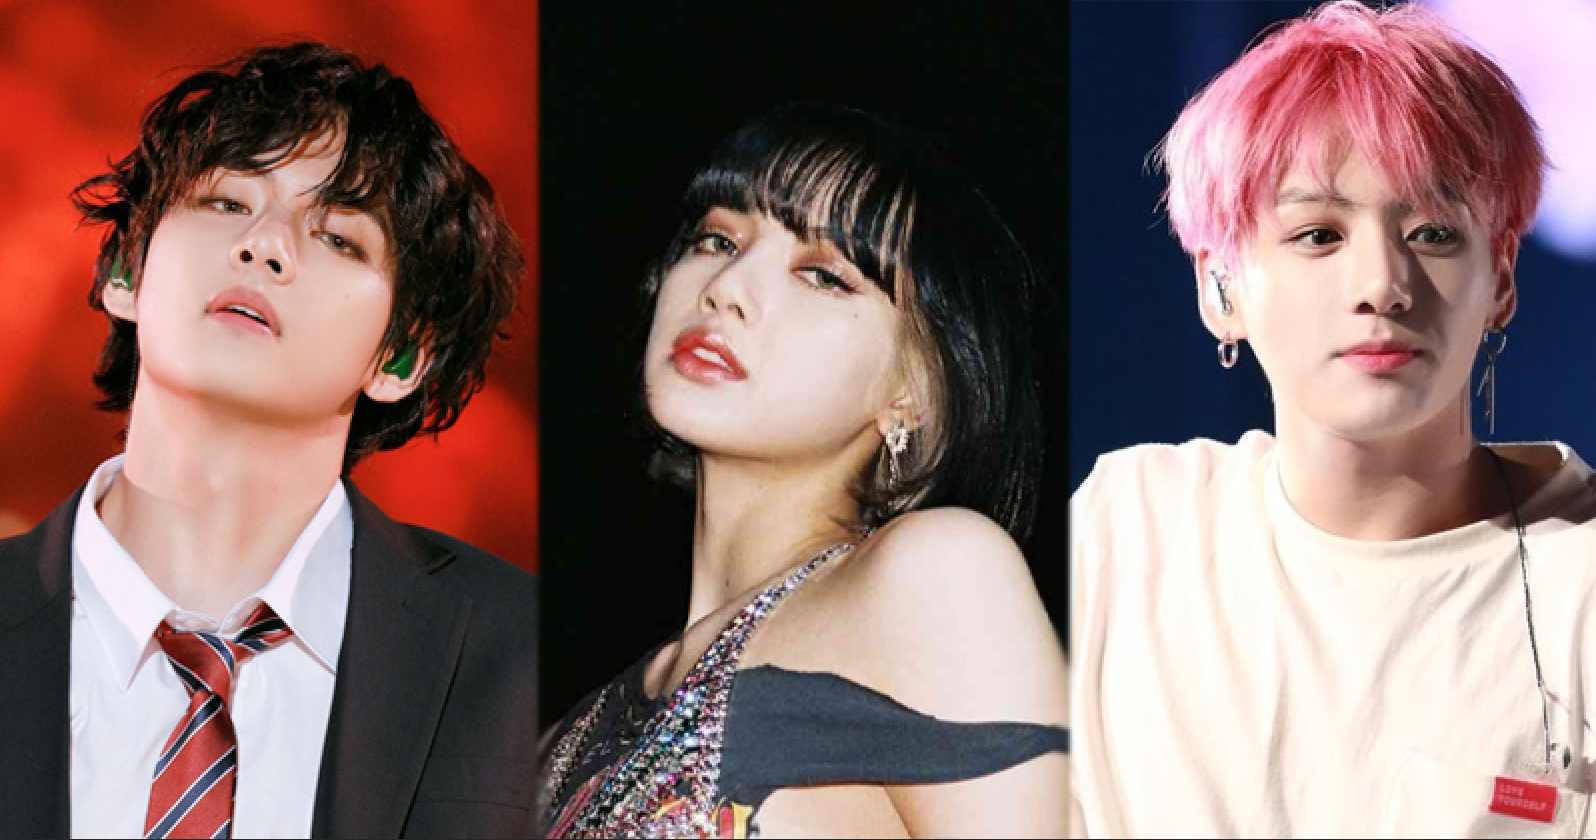 British Magazine Selects the Top 10 Most Popular K-Pop Idols in the World